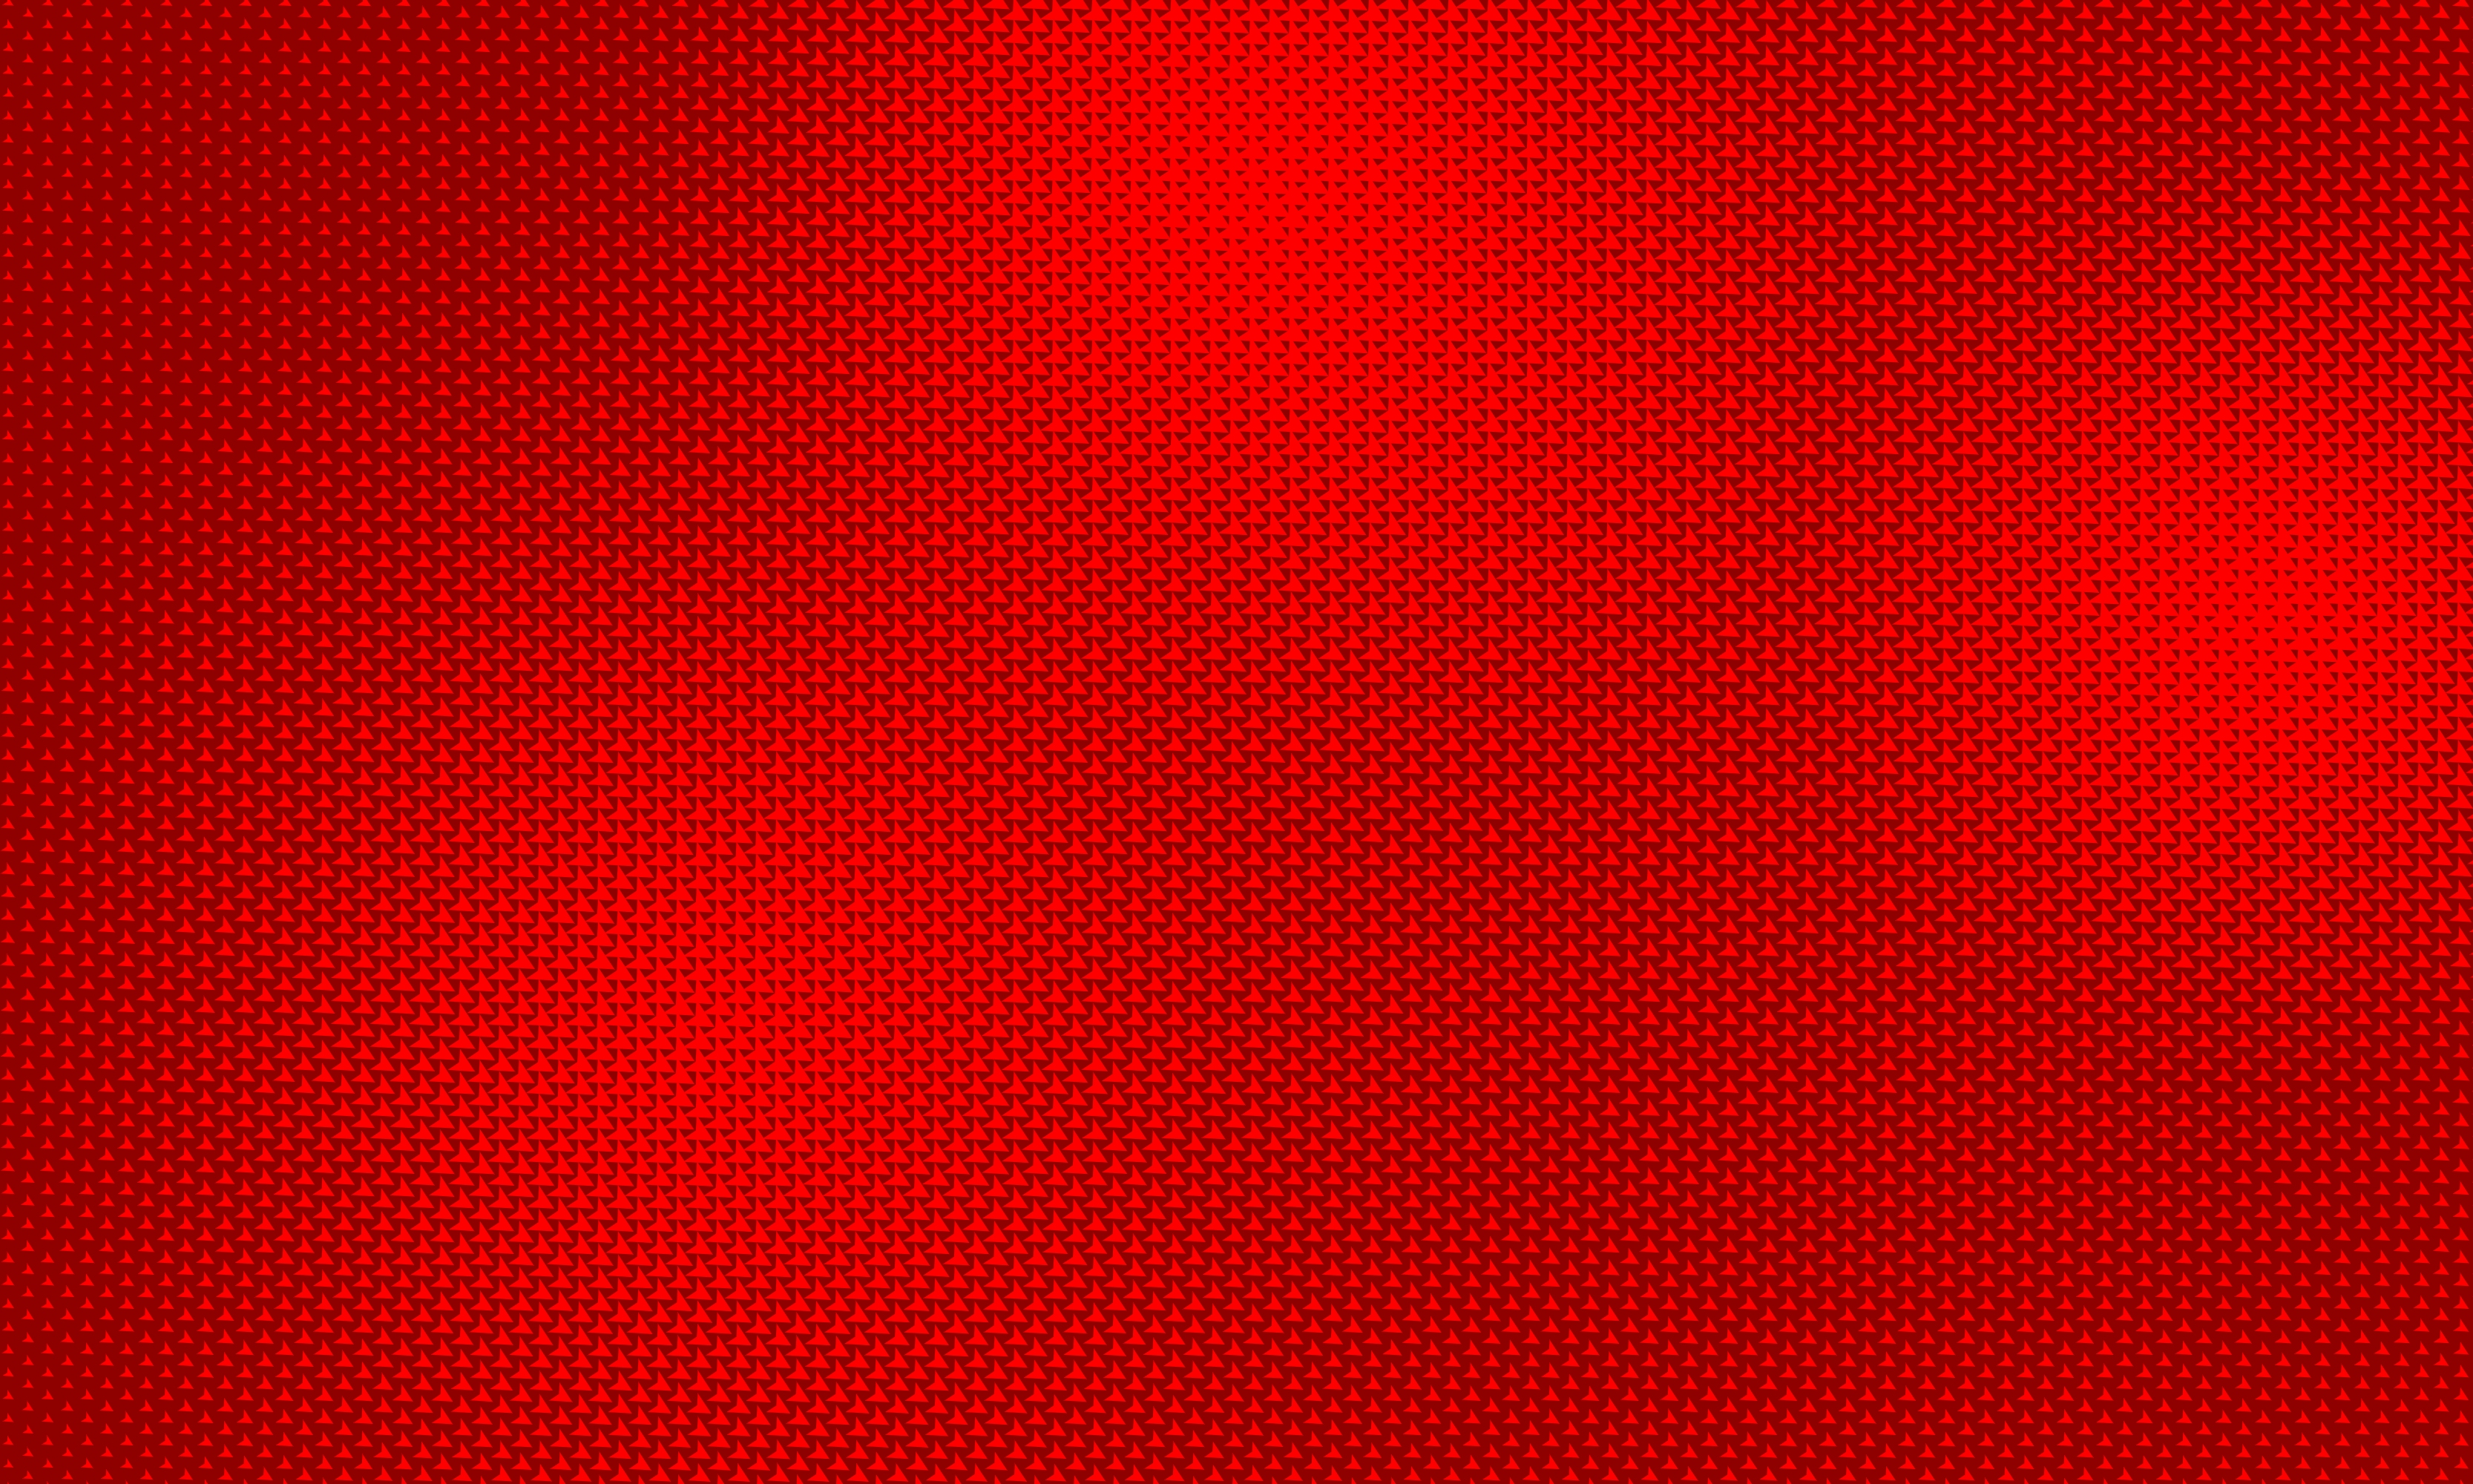 textures, patterns, red, texture, geometric, semitone